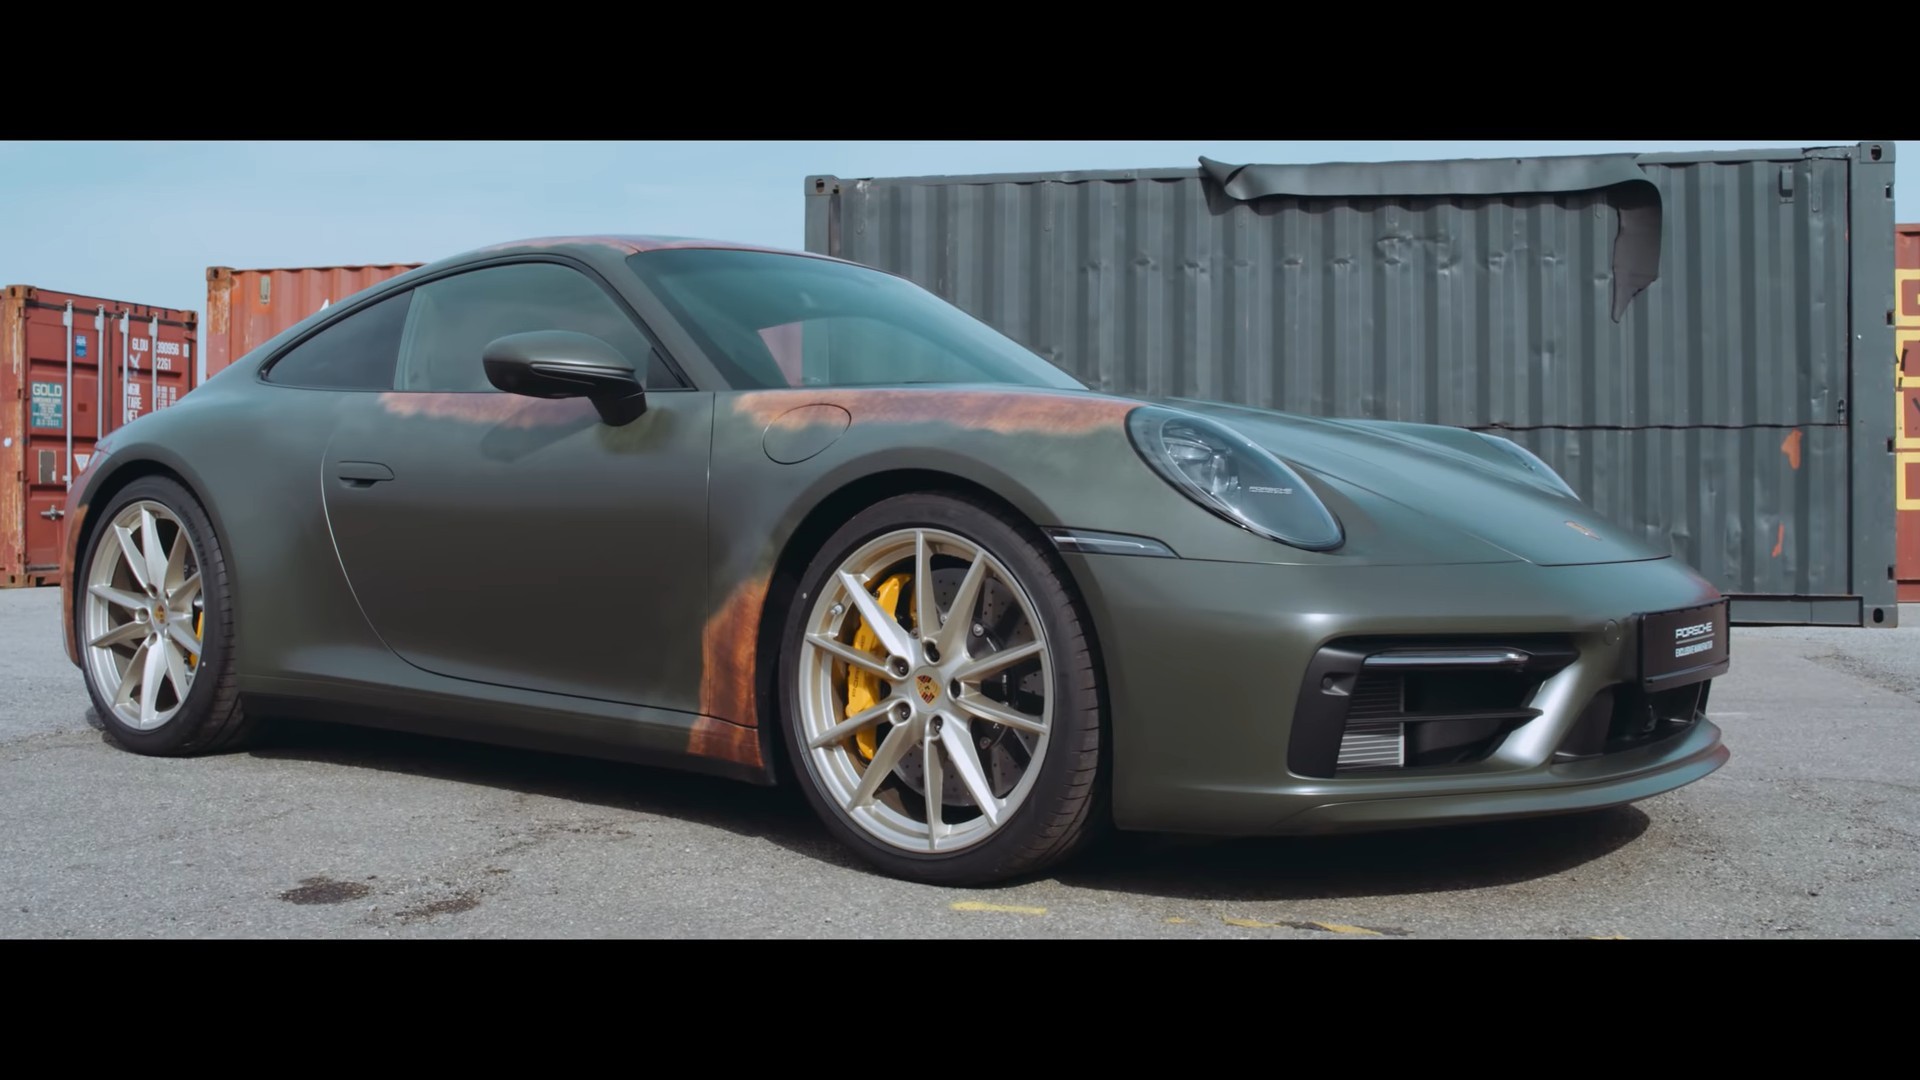 Porsche worth £80k spray painted with 'show off' as supercar